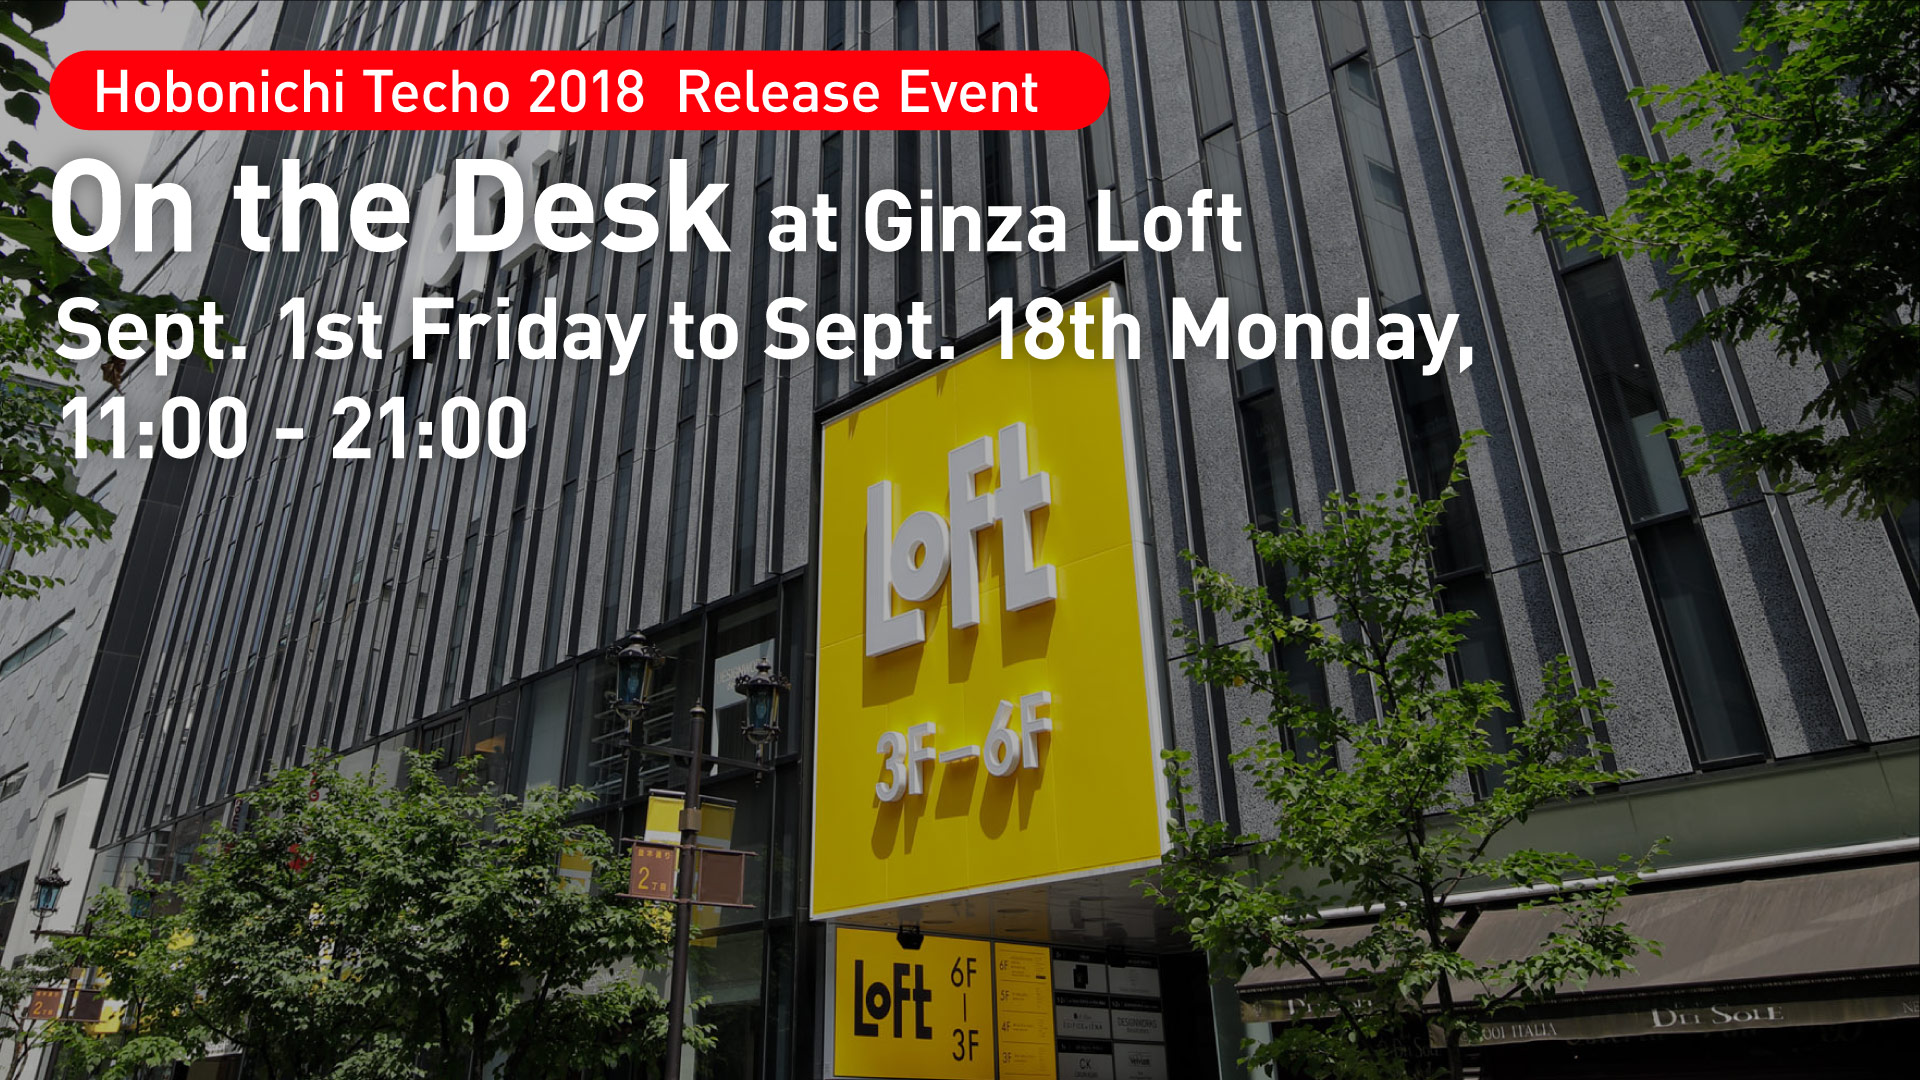 Hobonichi Techo 2018  Release Event On the Desk at Ginza Loft Sept. 1st Friday to Sept. 18th Monday, 11:00 - 21:00